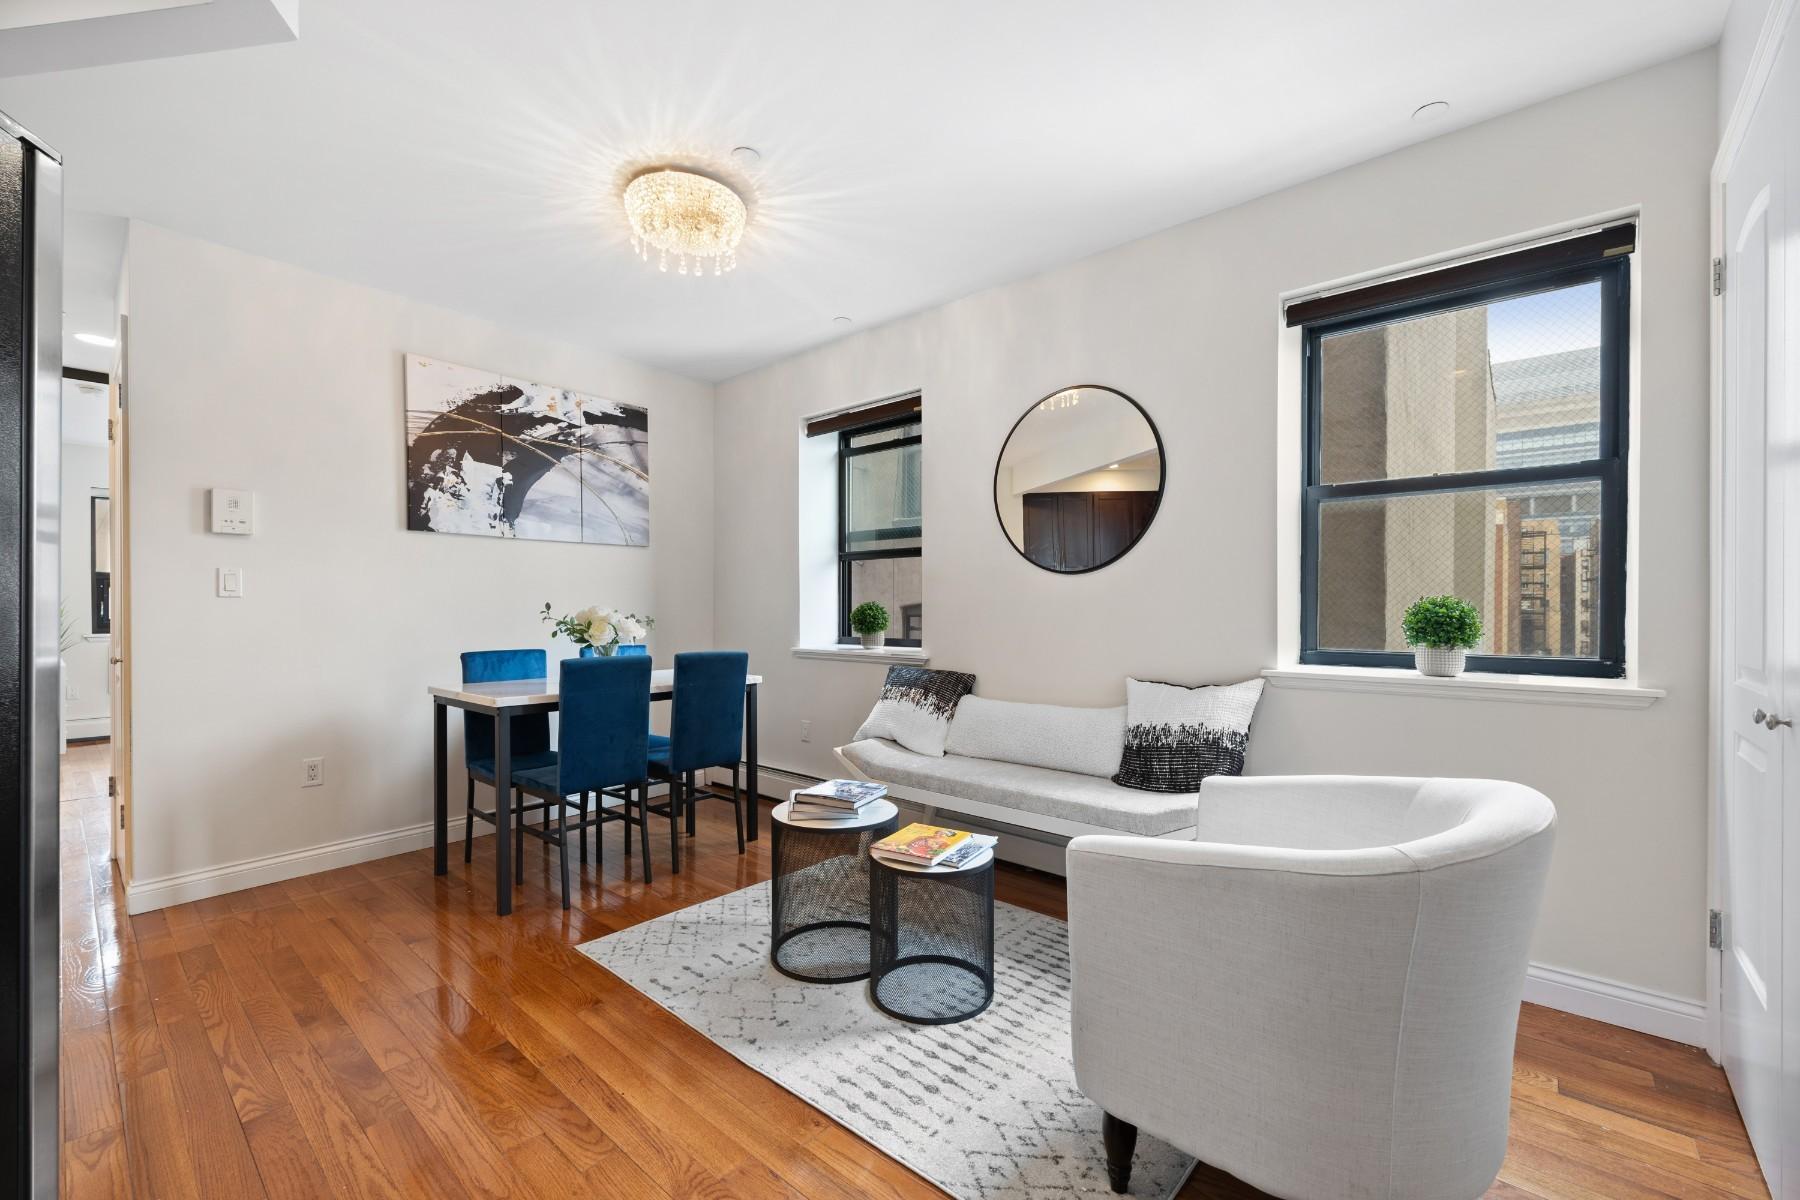 Property Image for 456 West 167th Street 4D